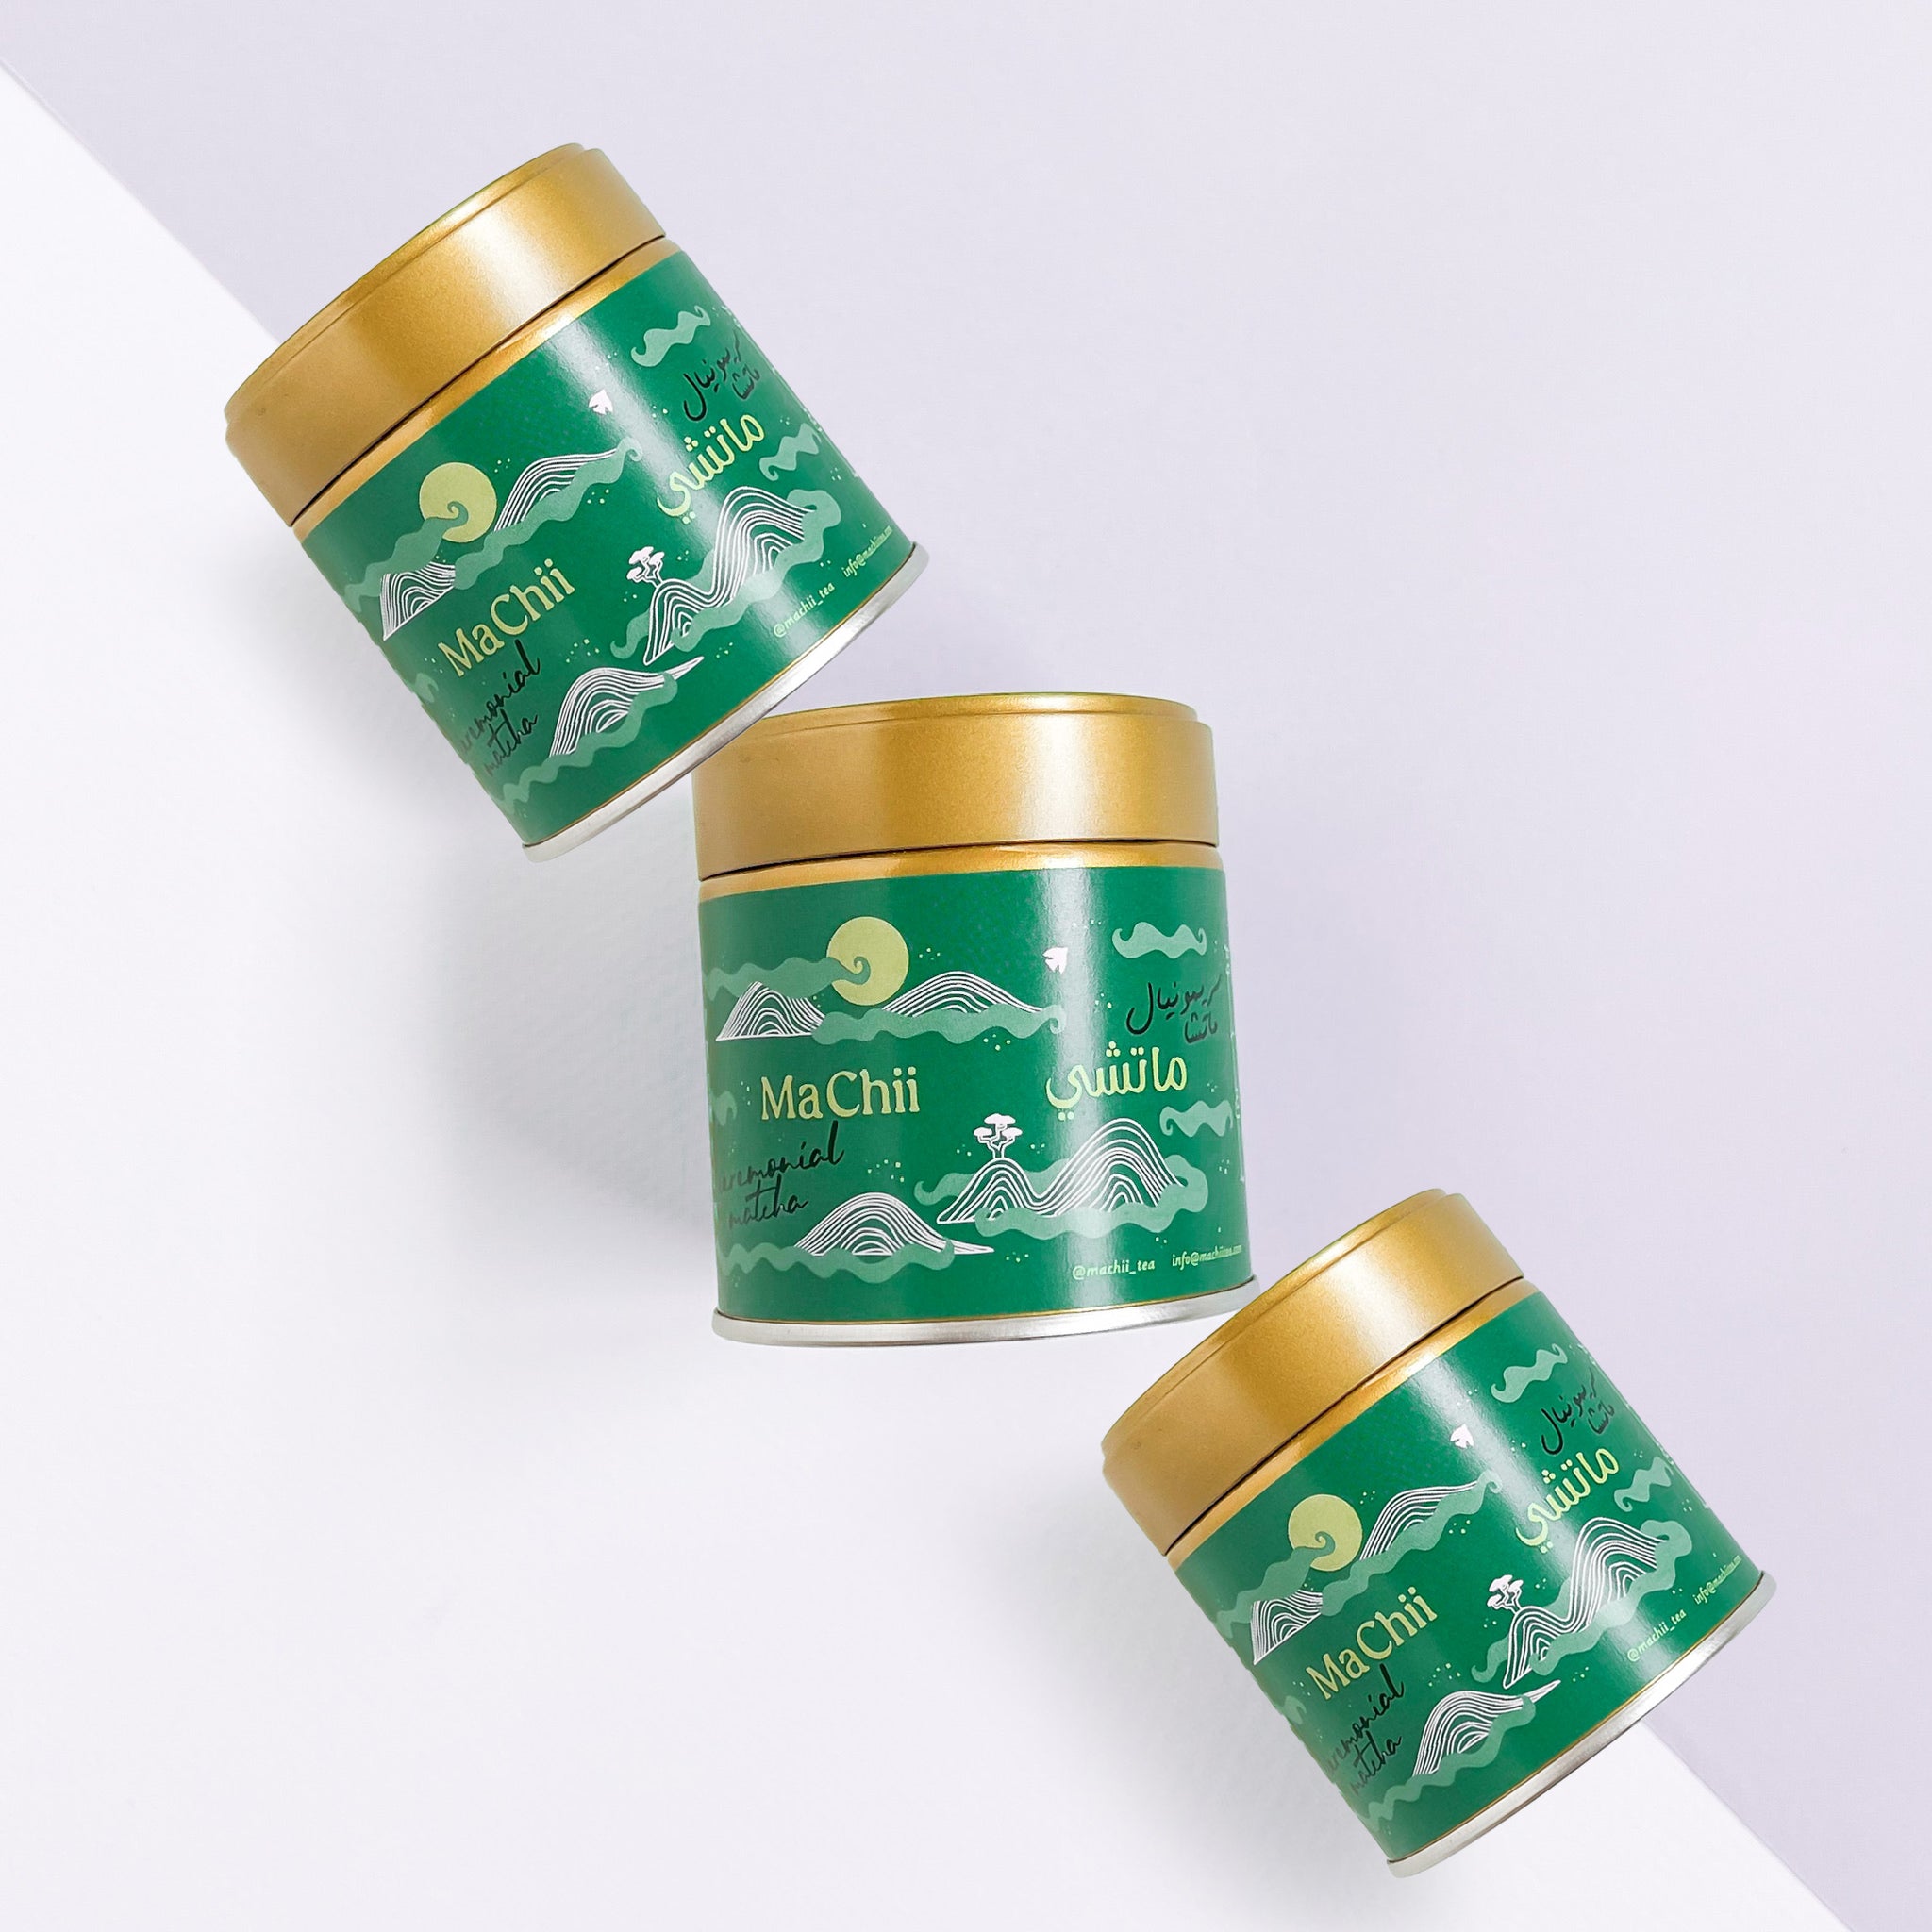 three ceremonial matcha for lattes organic tins on a table. the tins are all gold with green packaging of mountains.